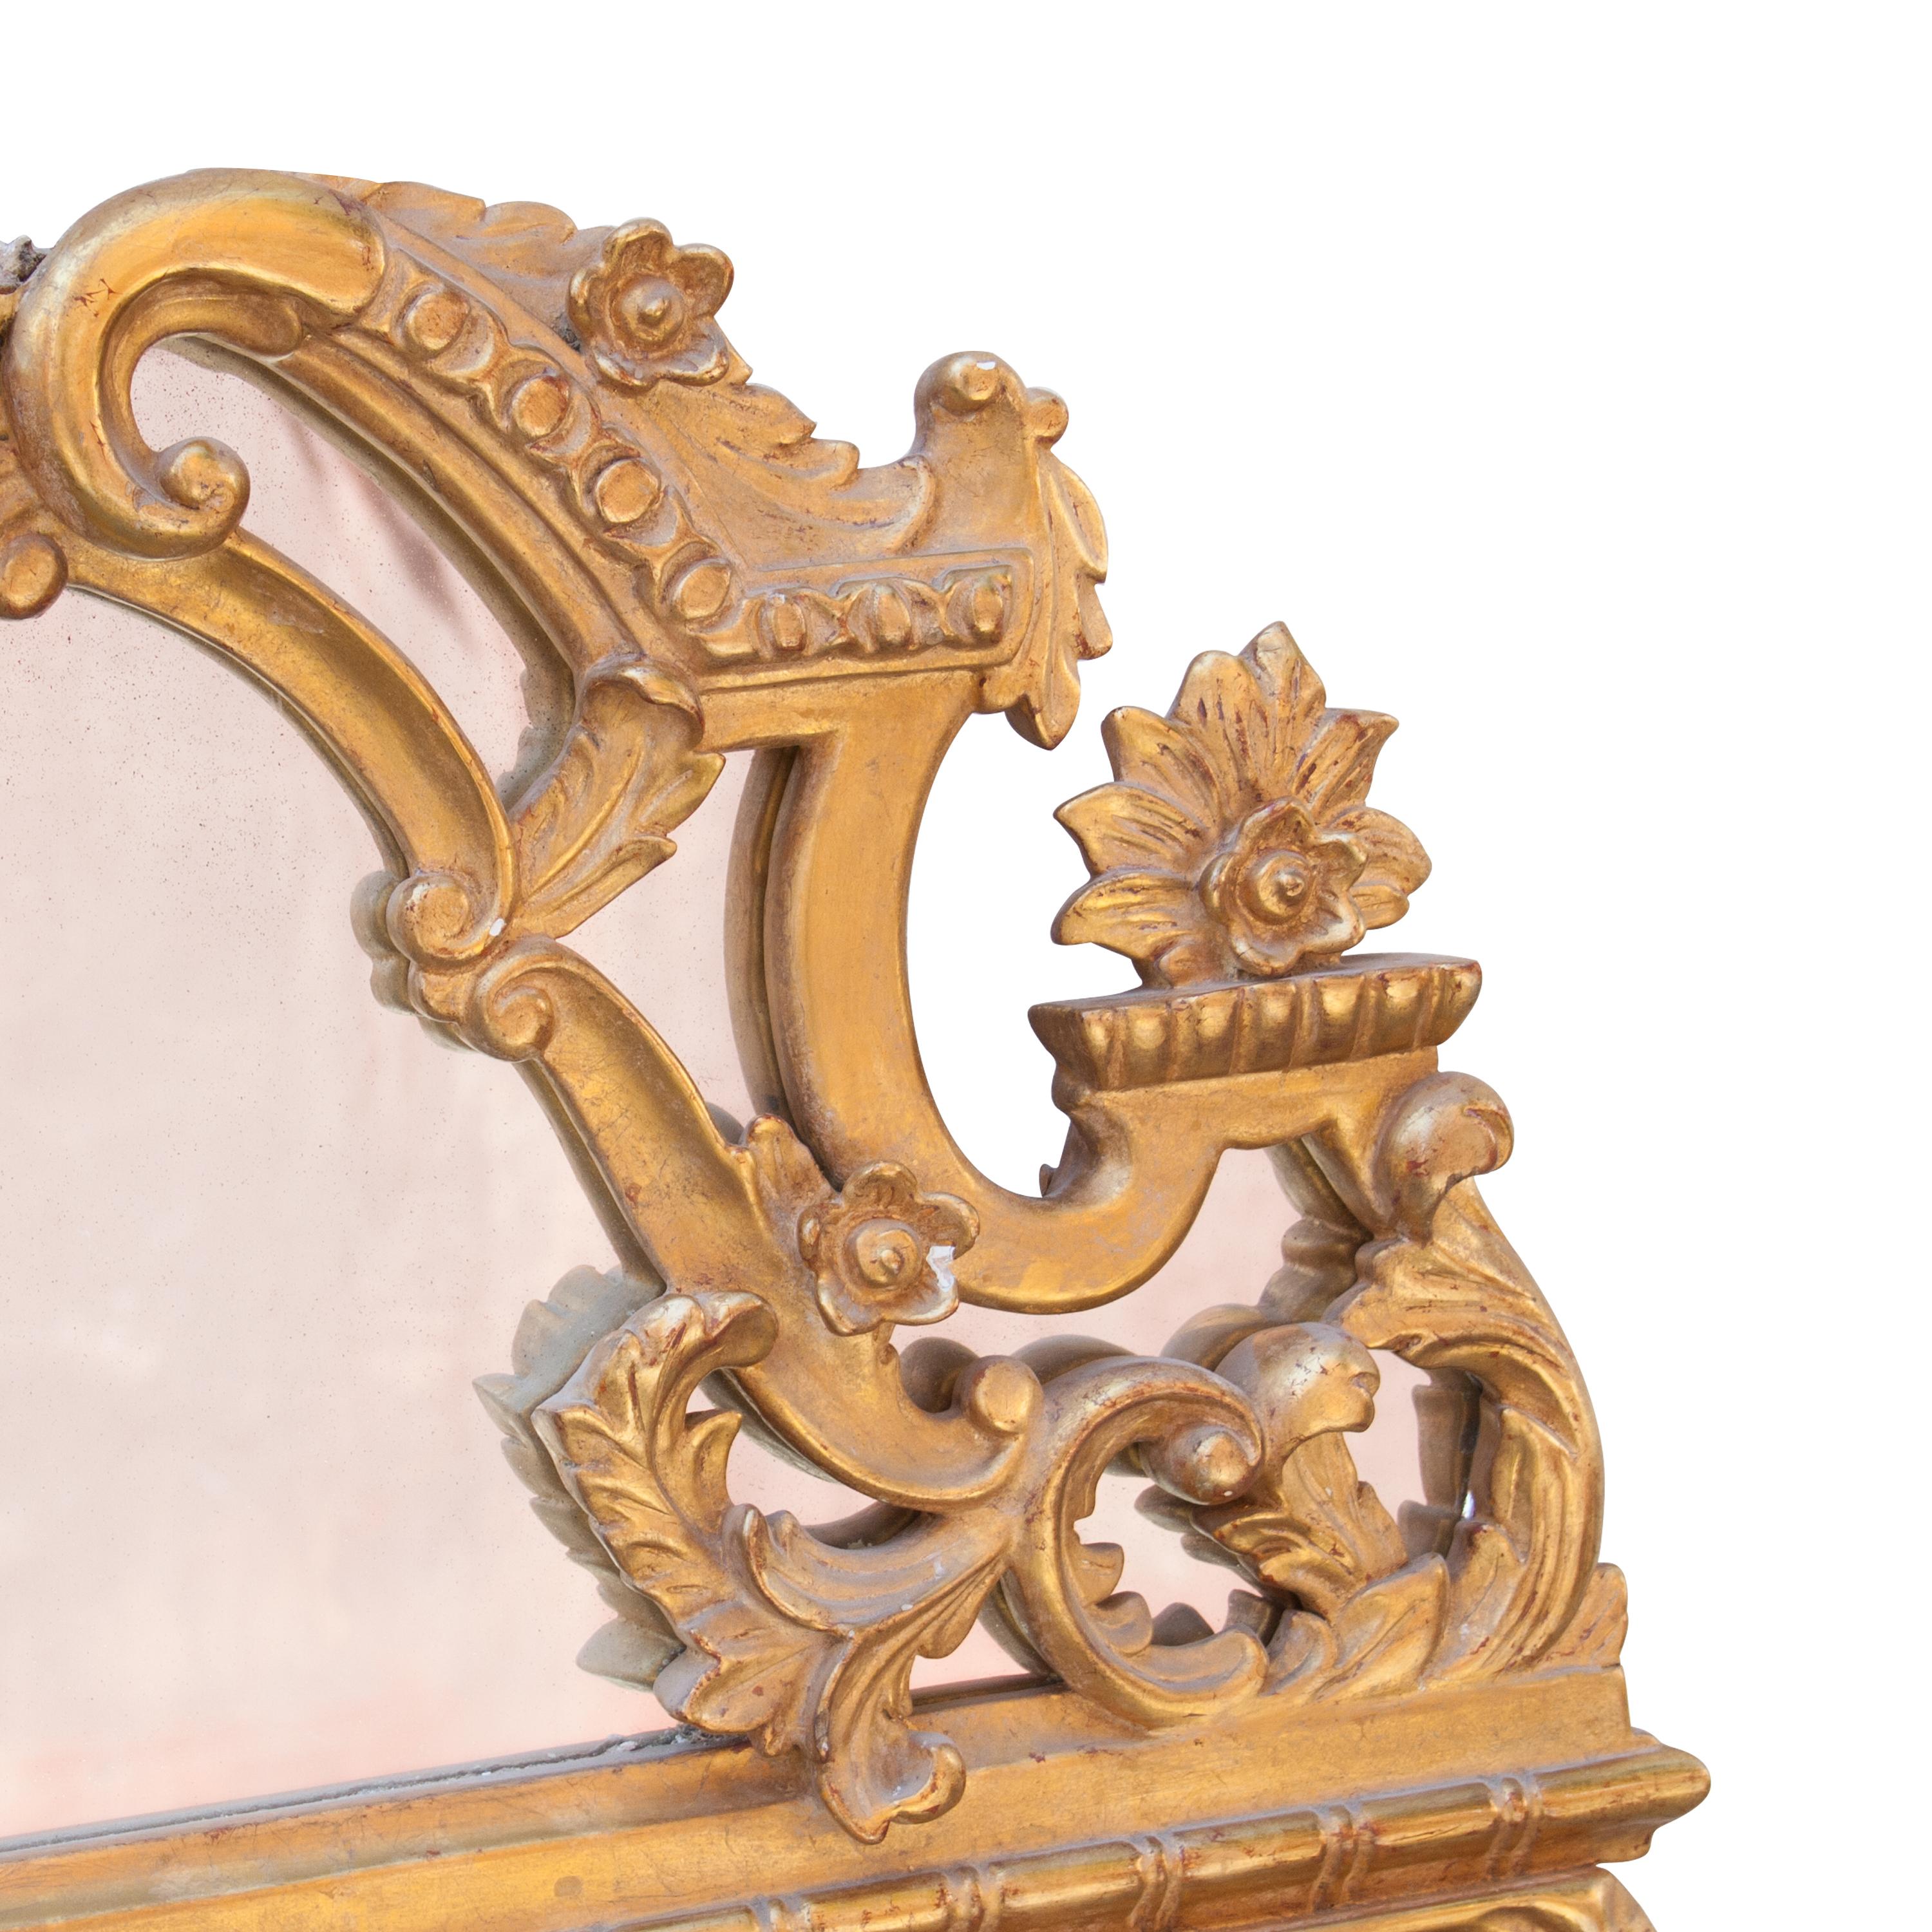 Neoclassical Revival Neoclassical Rectangular Gold Foil Hand Carved Wooden Mirror, 1970 For Sale